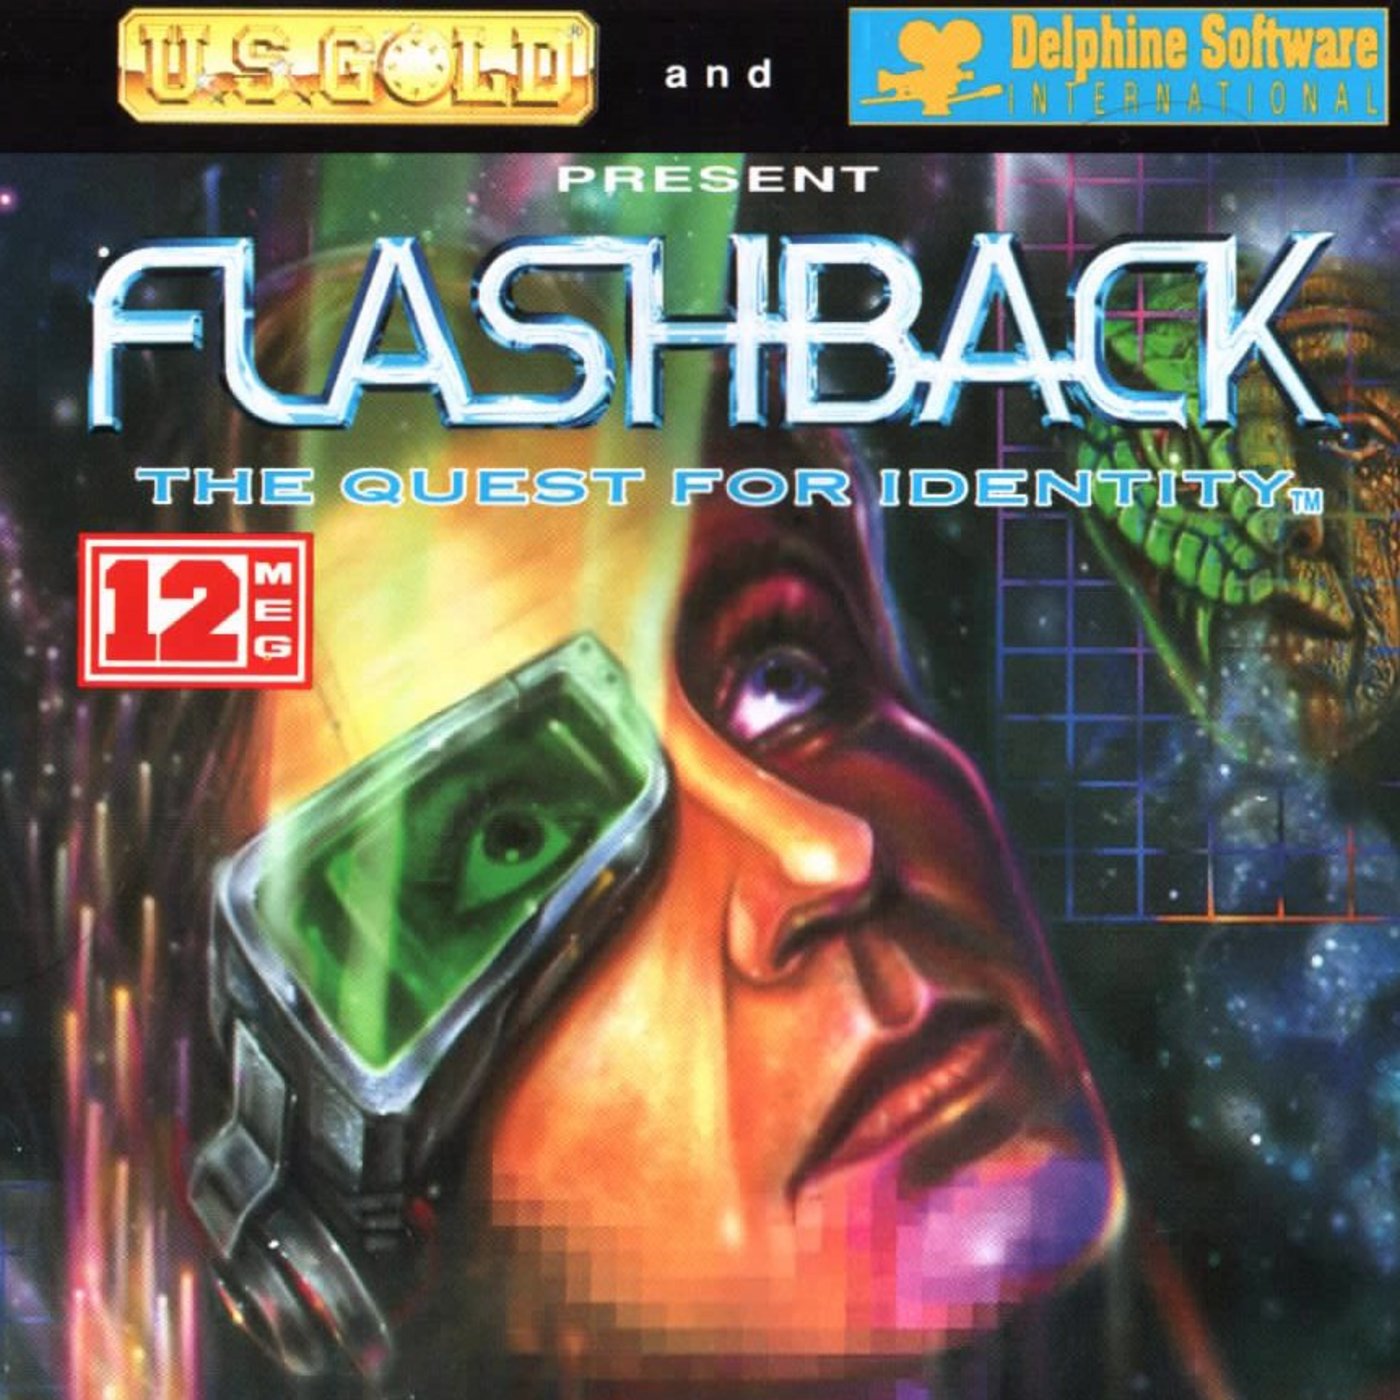 Episode 62 (Flashback: The Quest for Identity)